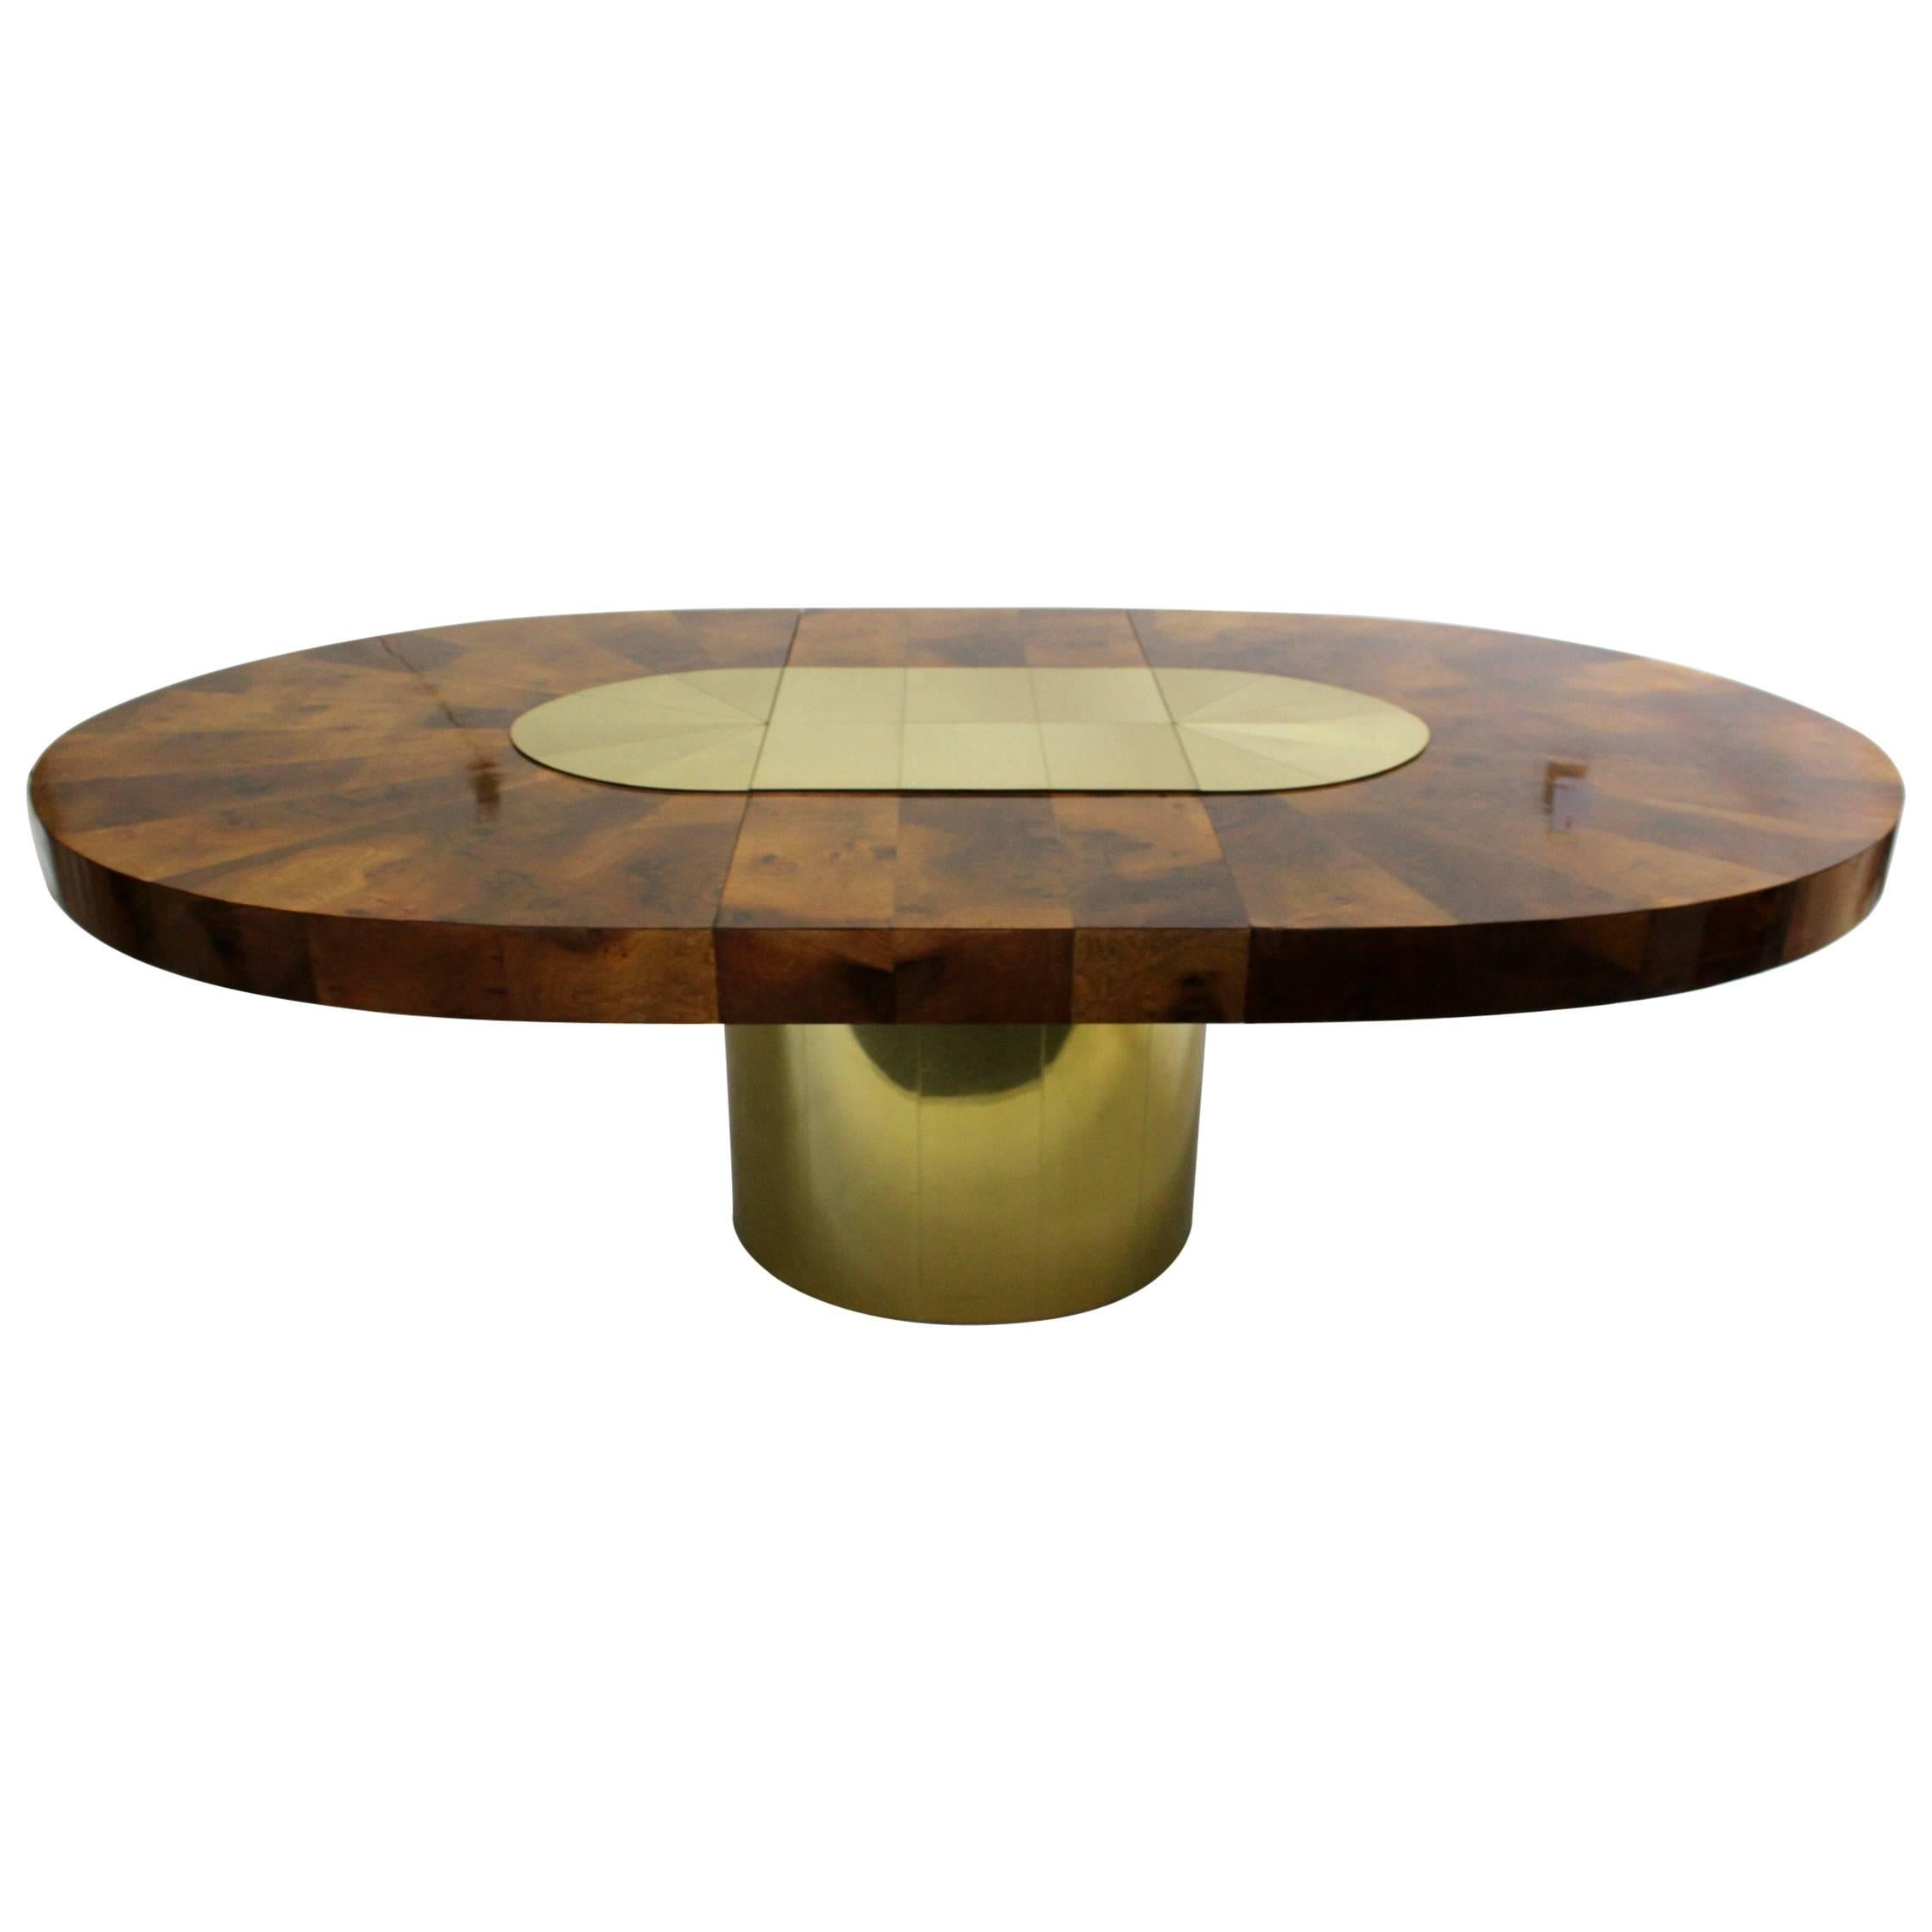 Brass and Wood Sunburst Paul Evans for Directional Large Oval Dining Table For Sale